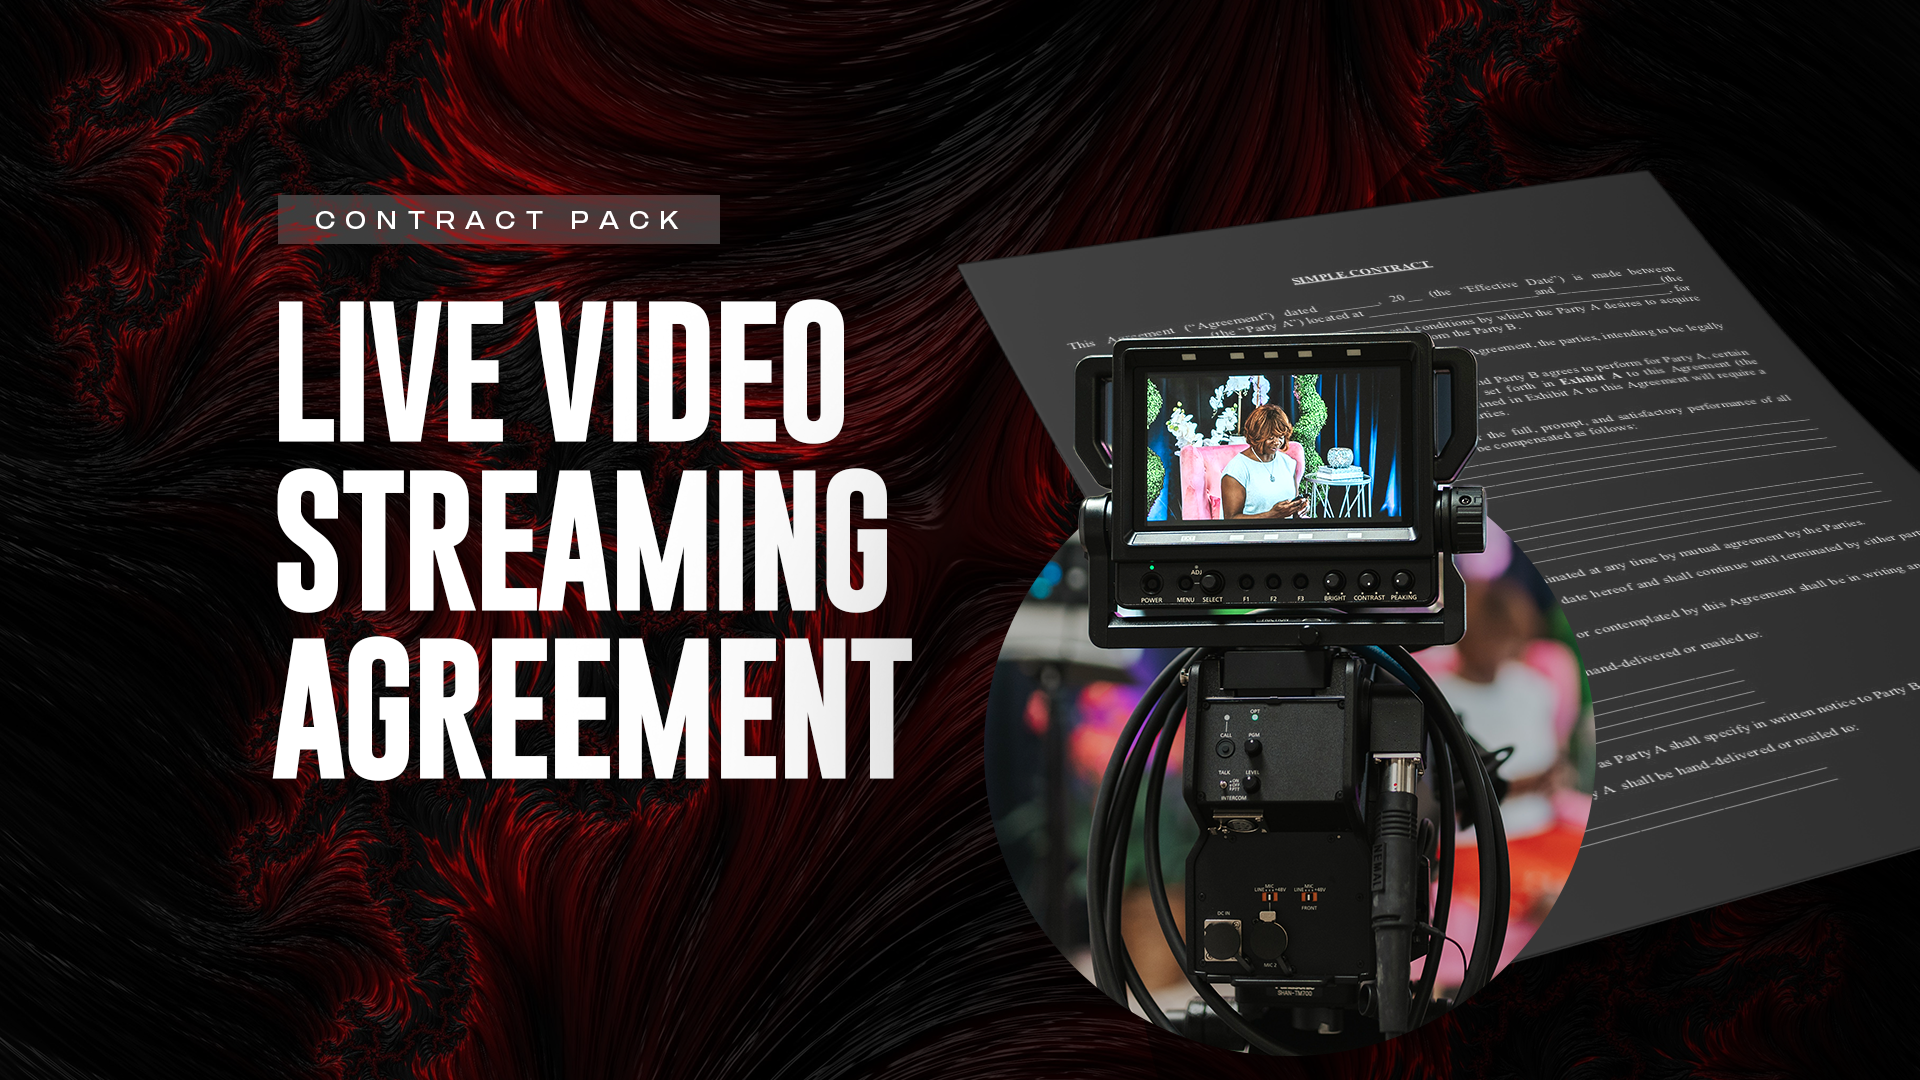 Live Video Streaming Agreement